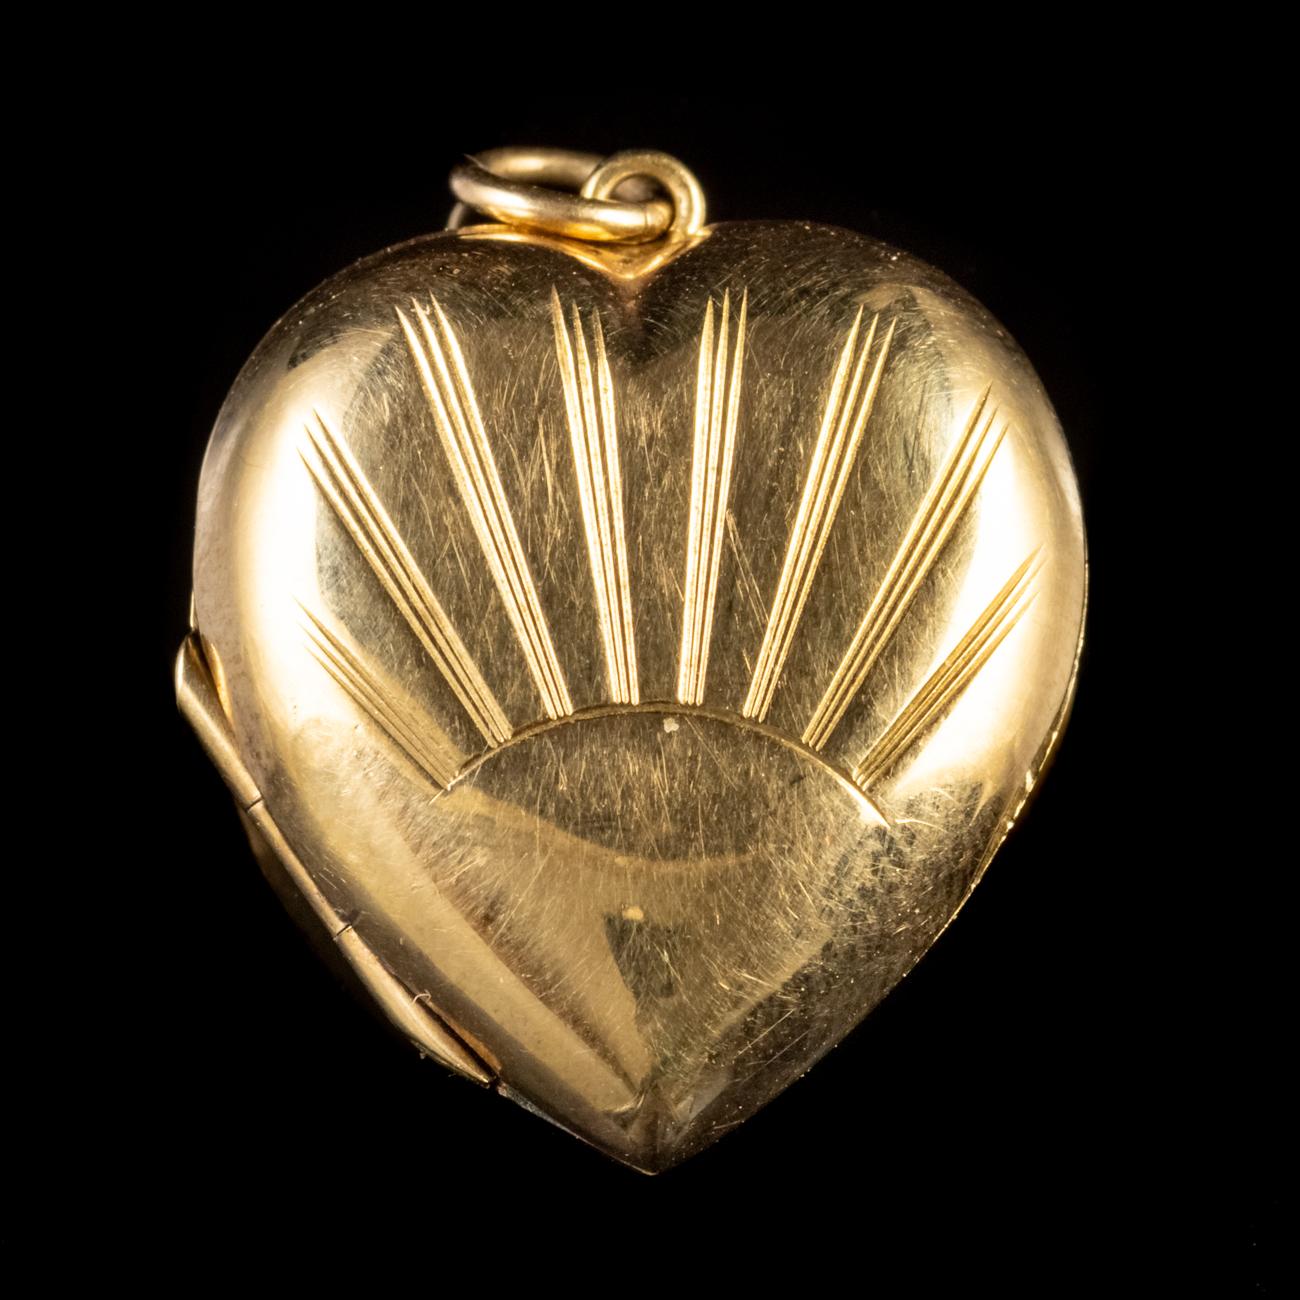 This beautiful Vintage locket has been commissioned in 9ct Yellow Gold front and back. It features a beautiful engraving of a sunrise on the front with sunbeams extending upward.

Hearts were a popular motif concerning lockets and of course